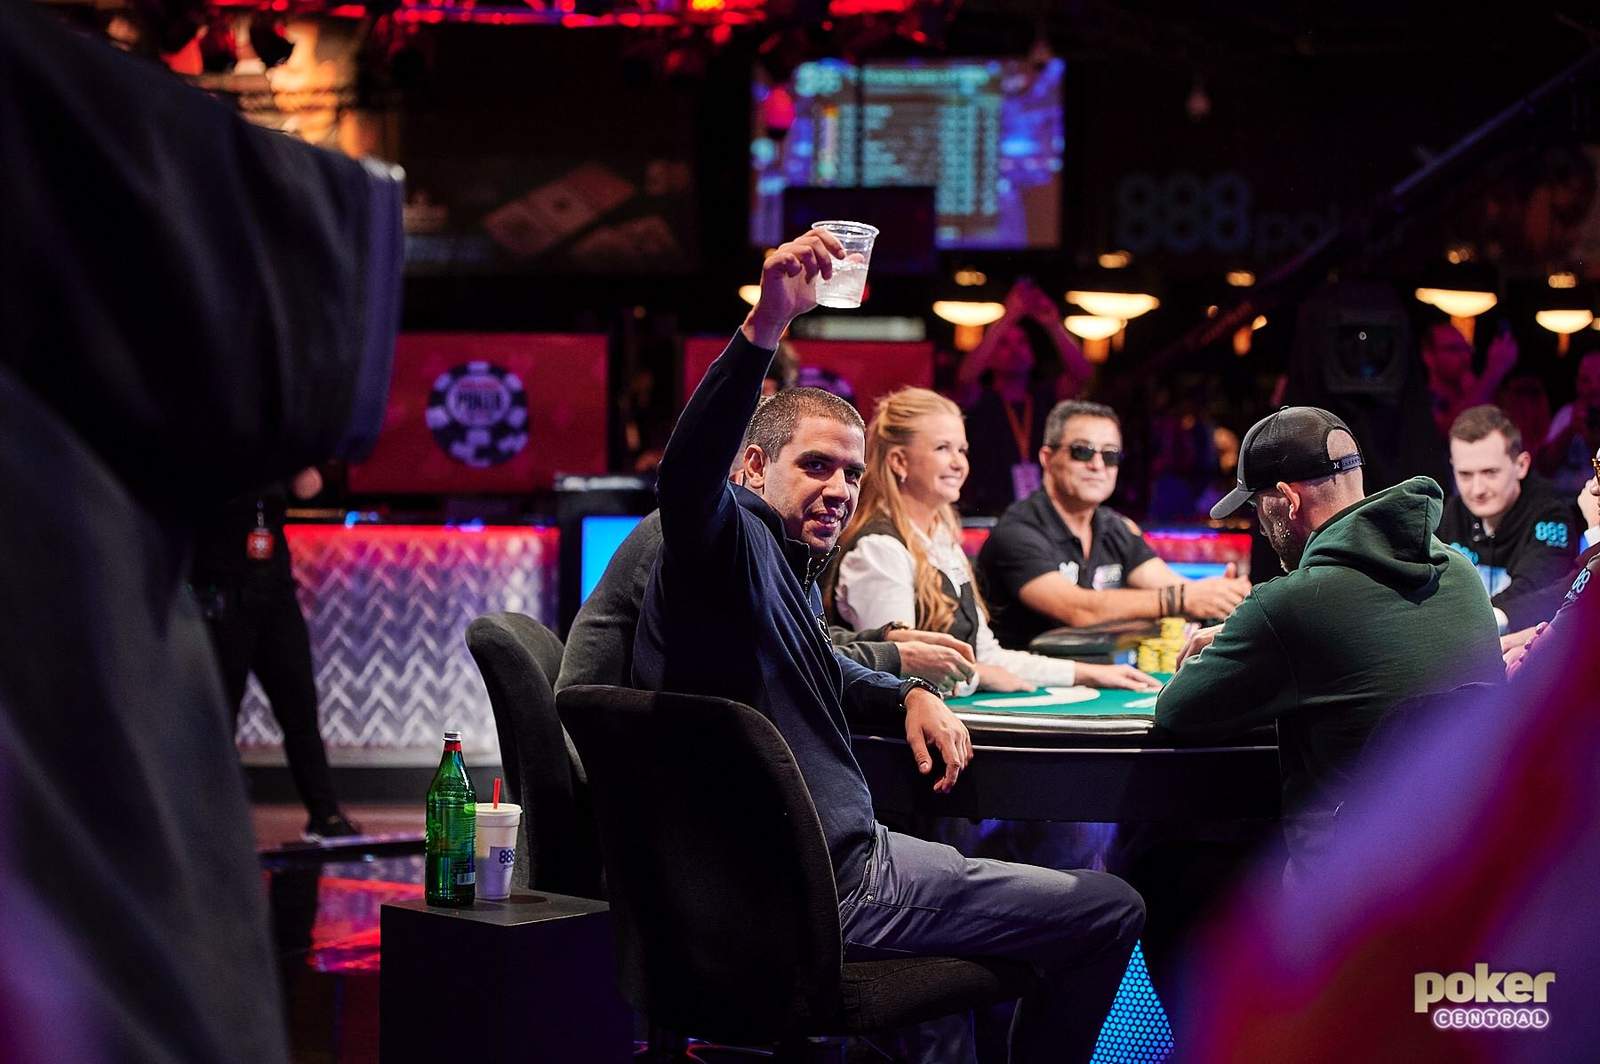 Milos Skrbic Heartbroken After 9th Place Finish in 2019 WSOP Main Event